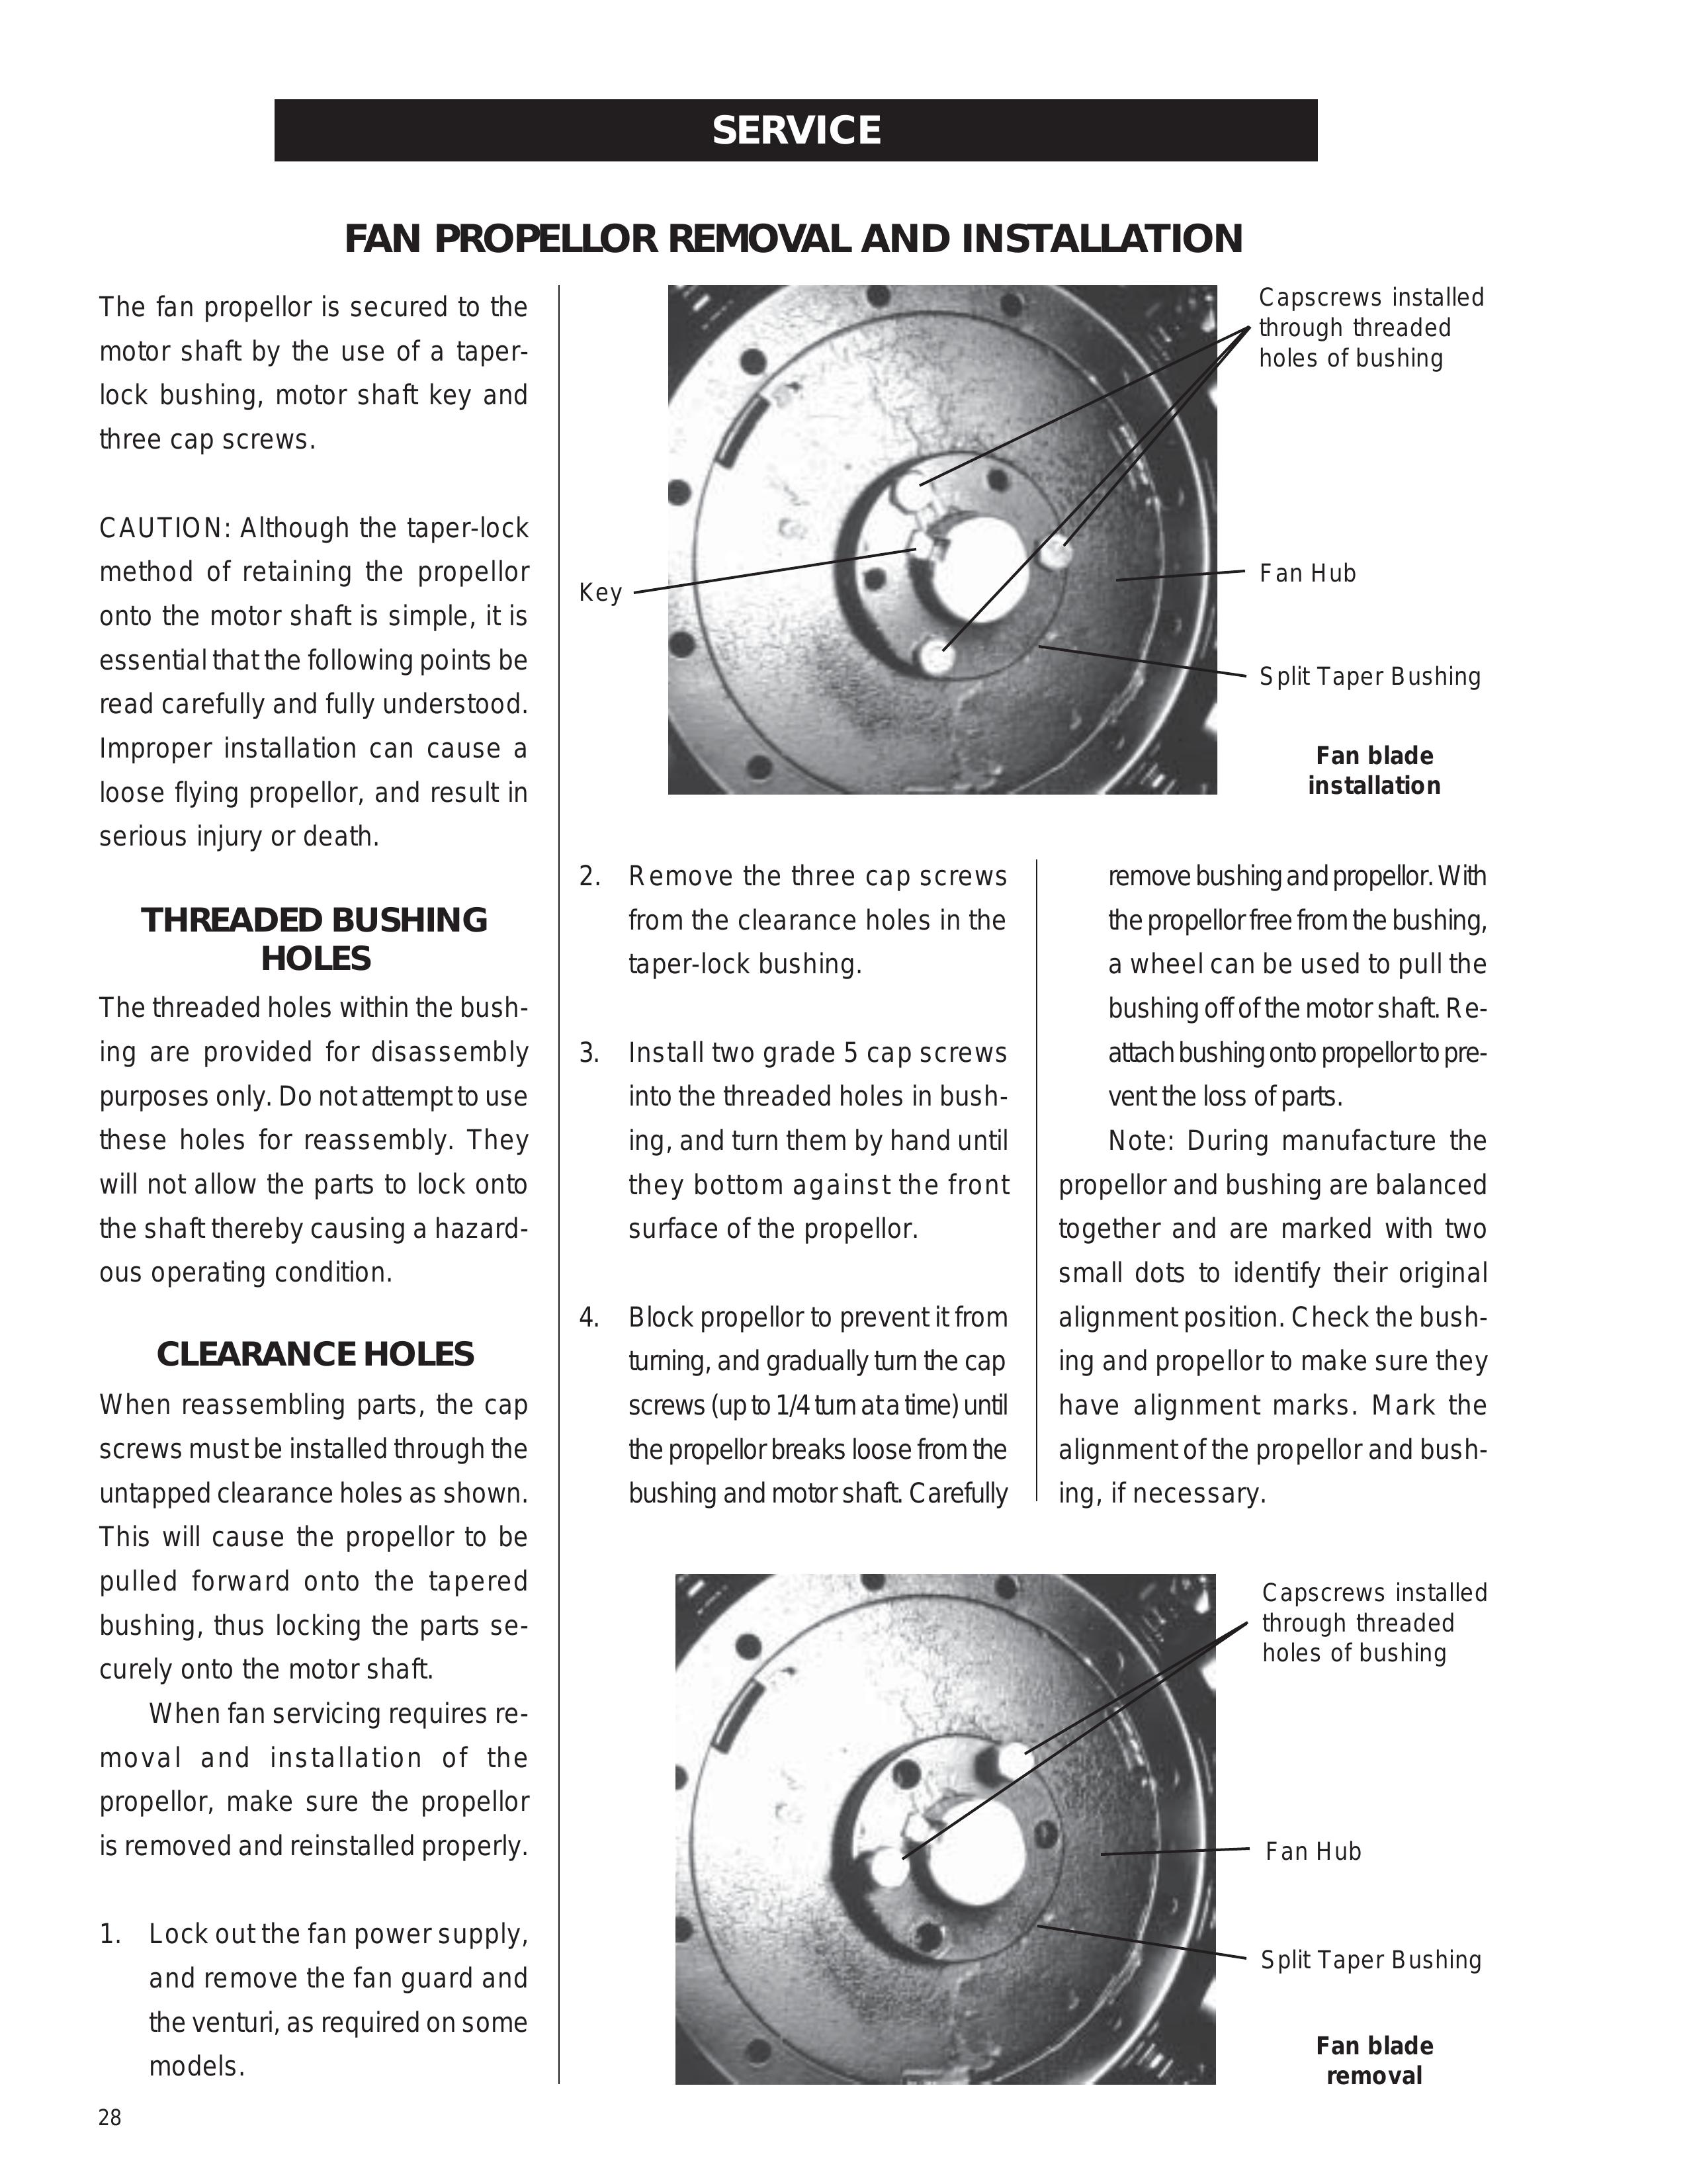 Airstream PNEG-343 Clothes Dryer User Manual (Page 28)